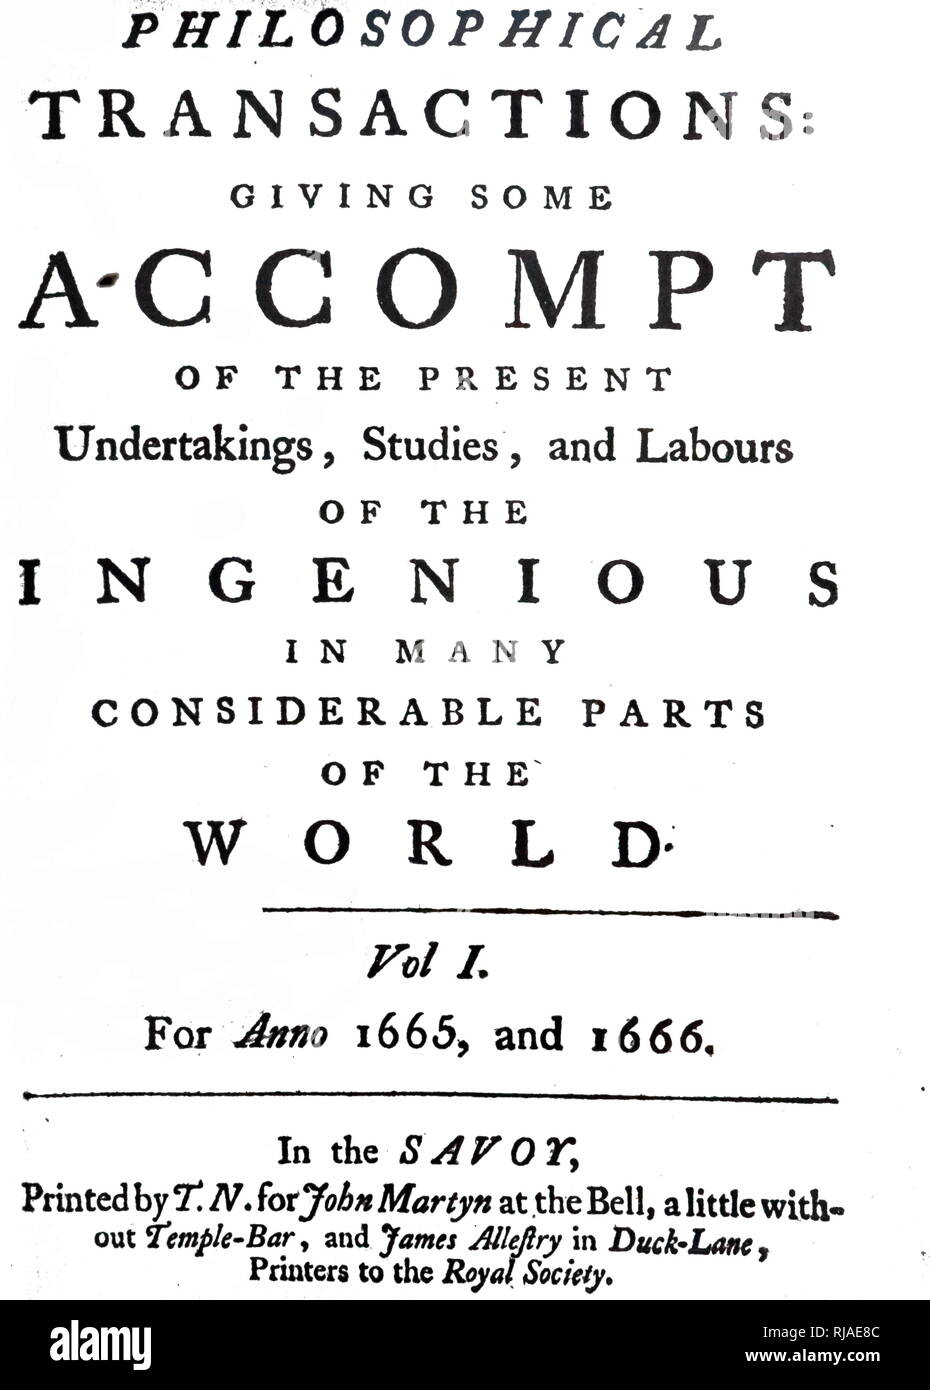 Title Page of 'Philosophical Transactions Volume I, published by the Royal Society in London 1666. the first issue of Philosophical Transactions, was the world's oldest scientific journal. Stock Photo